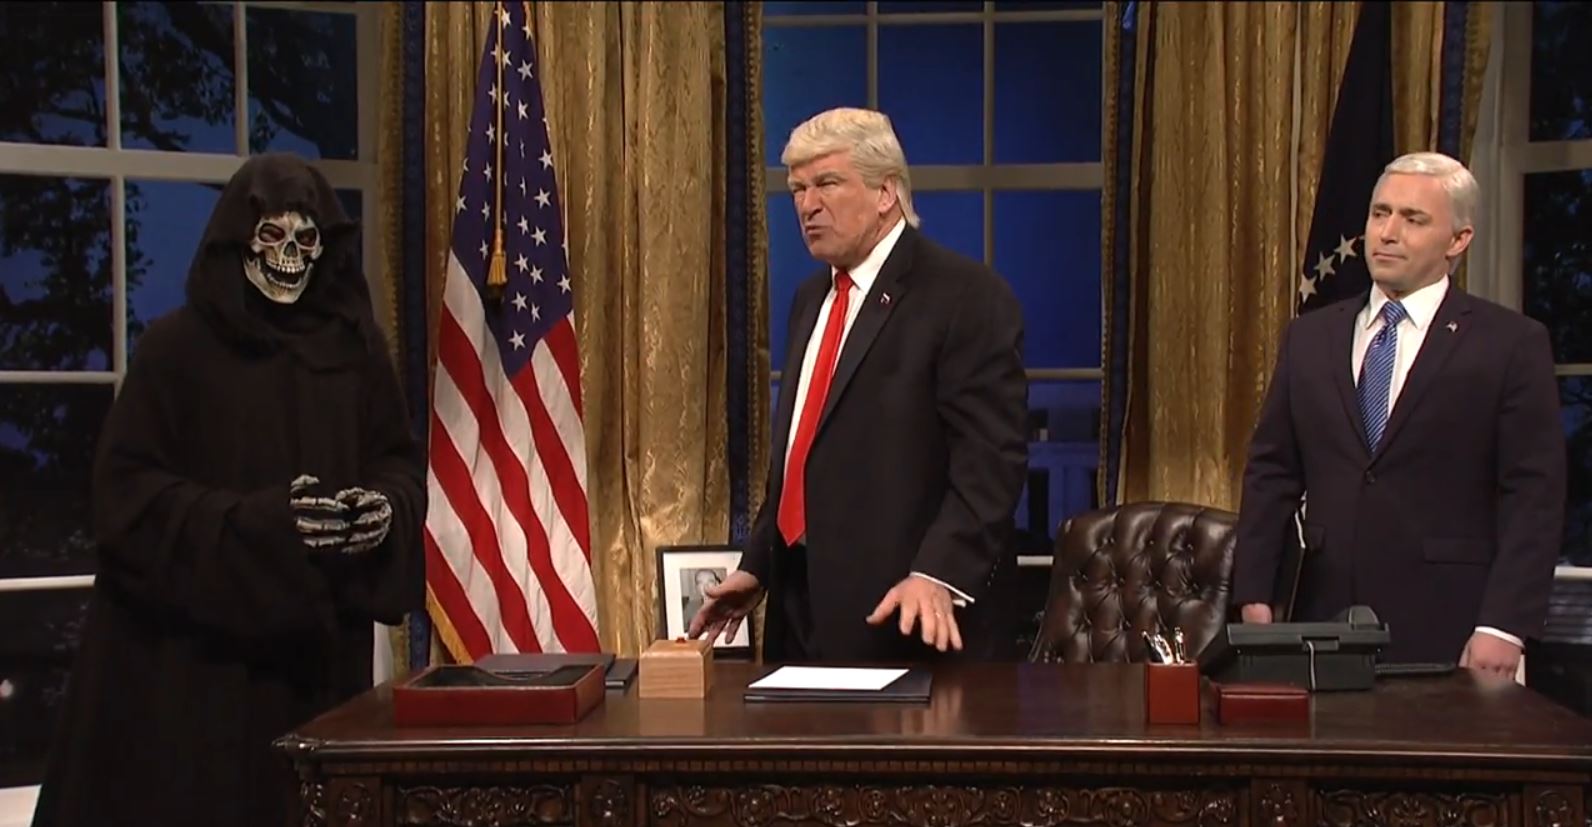 PHOTO: Alec Baldwin, portraying Donald Trump, is flanked by "Saturday Night Live" cast member Beck Bennett as Mike Pence, and the Grim Reaper, who is supposed to be White House chief strategist Steve Bannon, on "Saturday Night Live" on April 15, 2017.